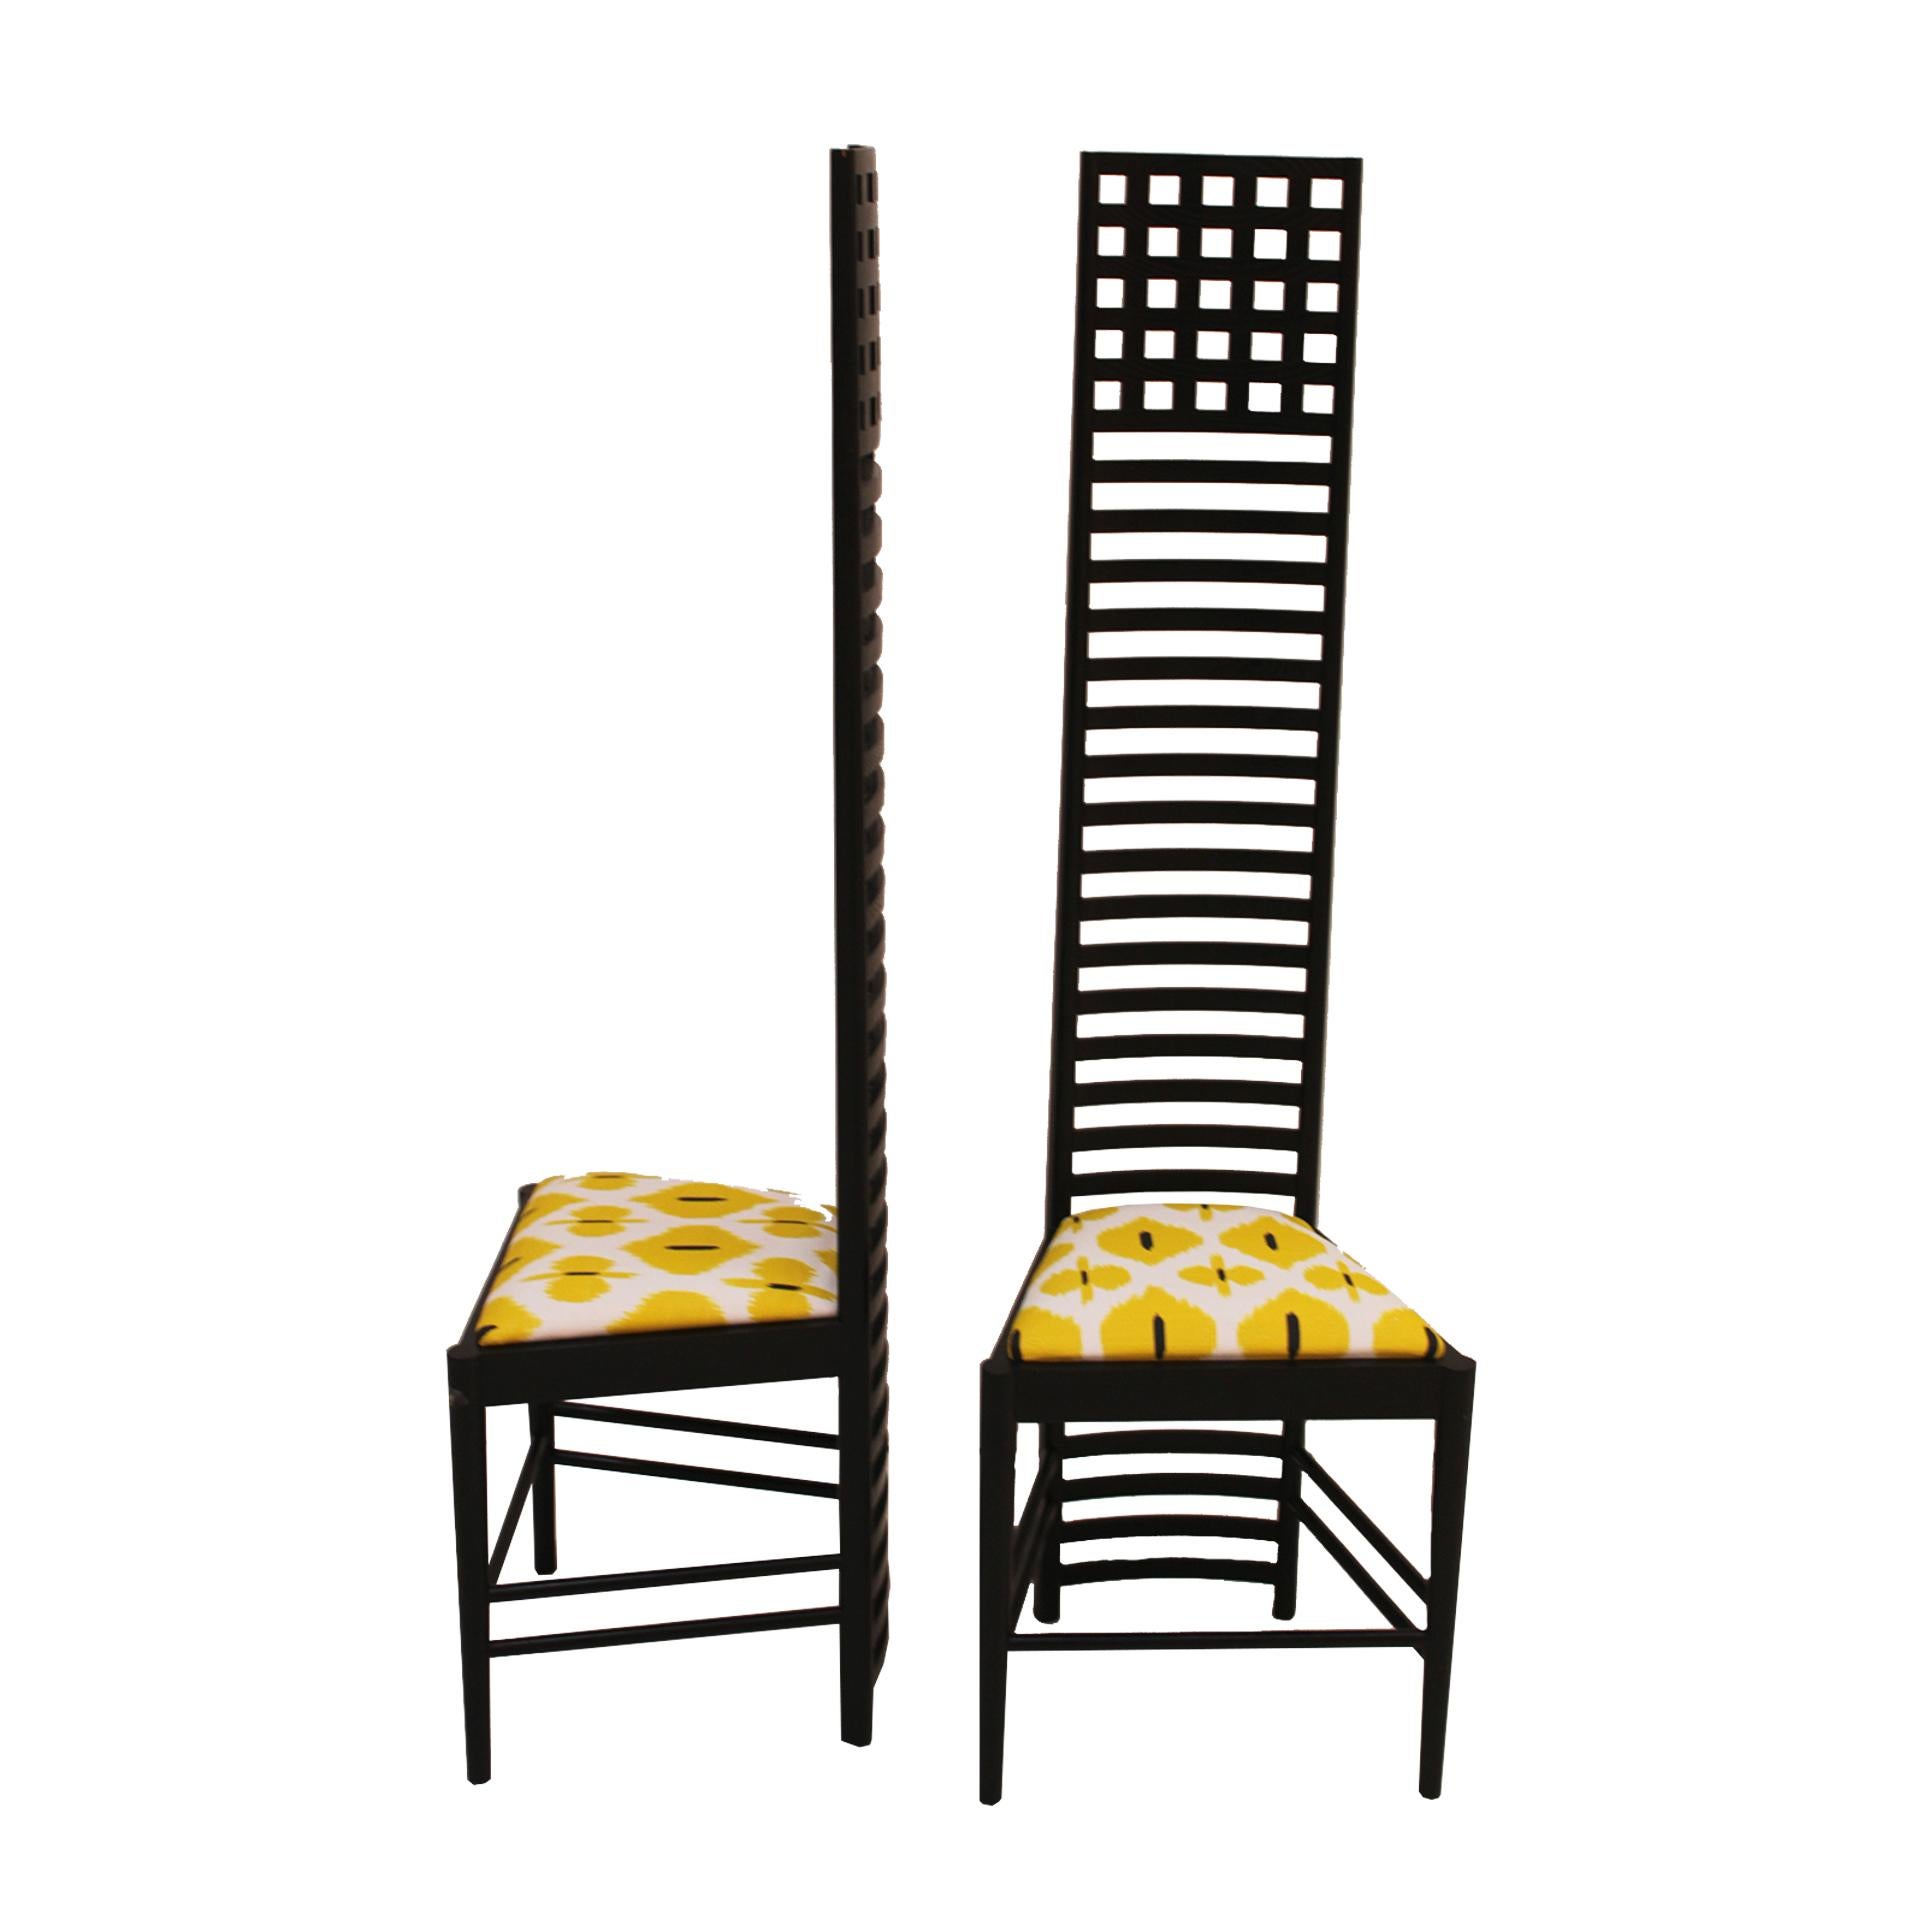 Pair of chairs model 